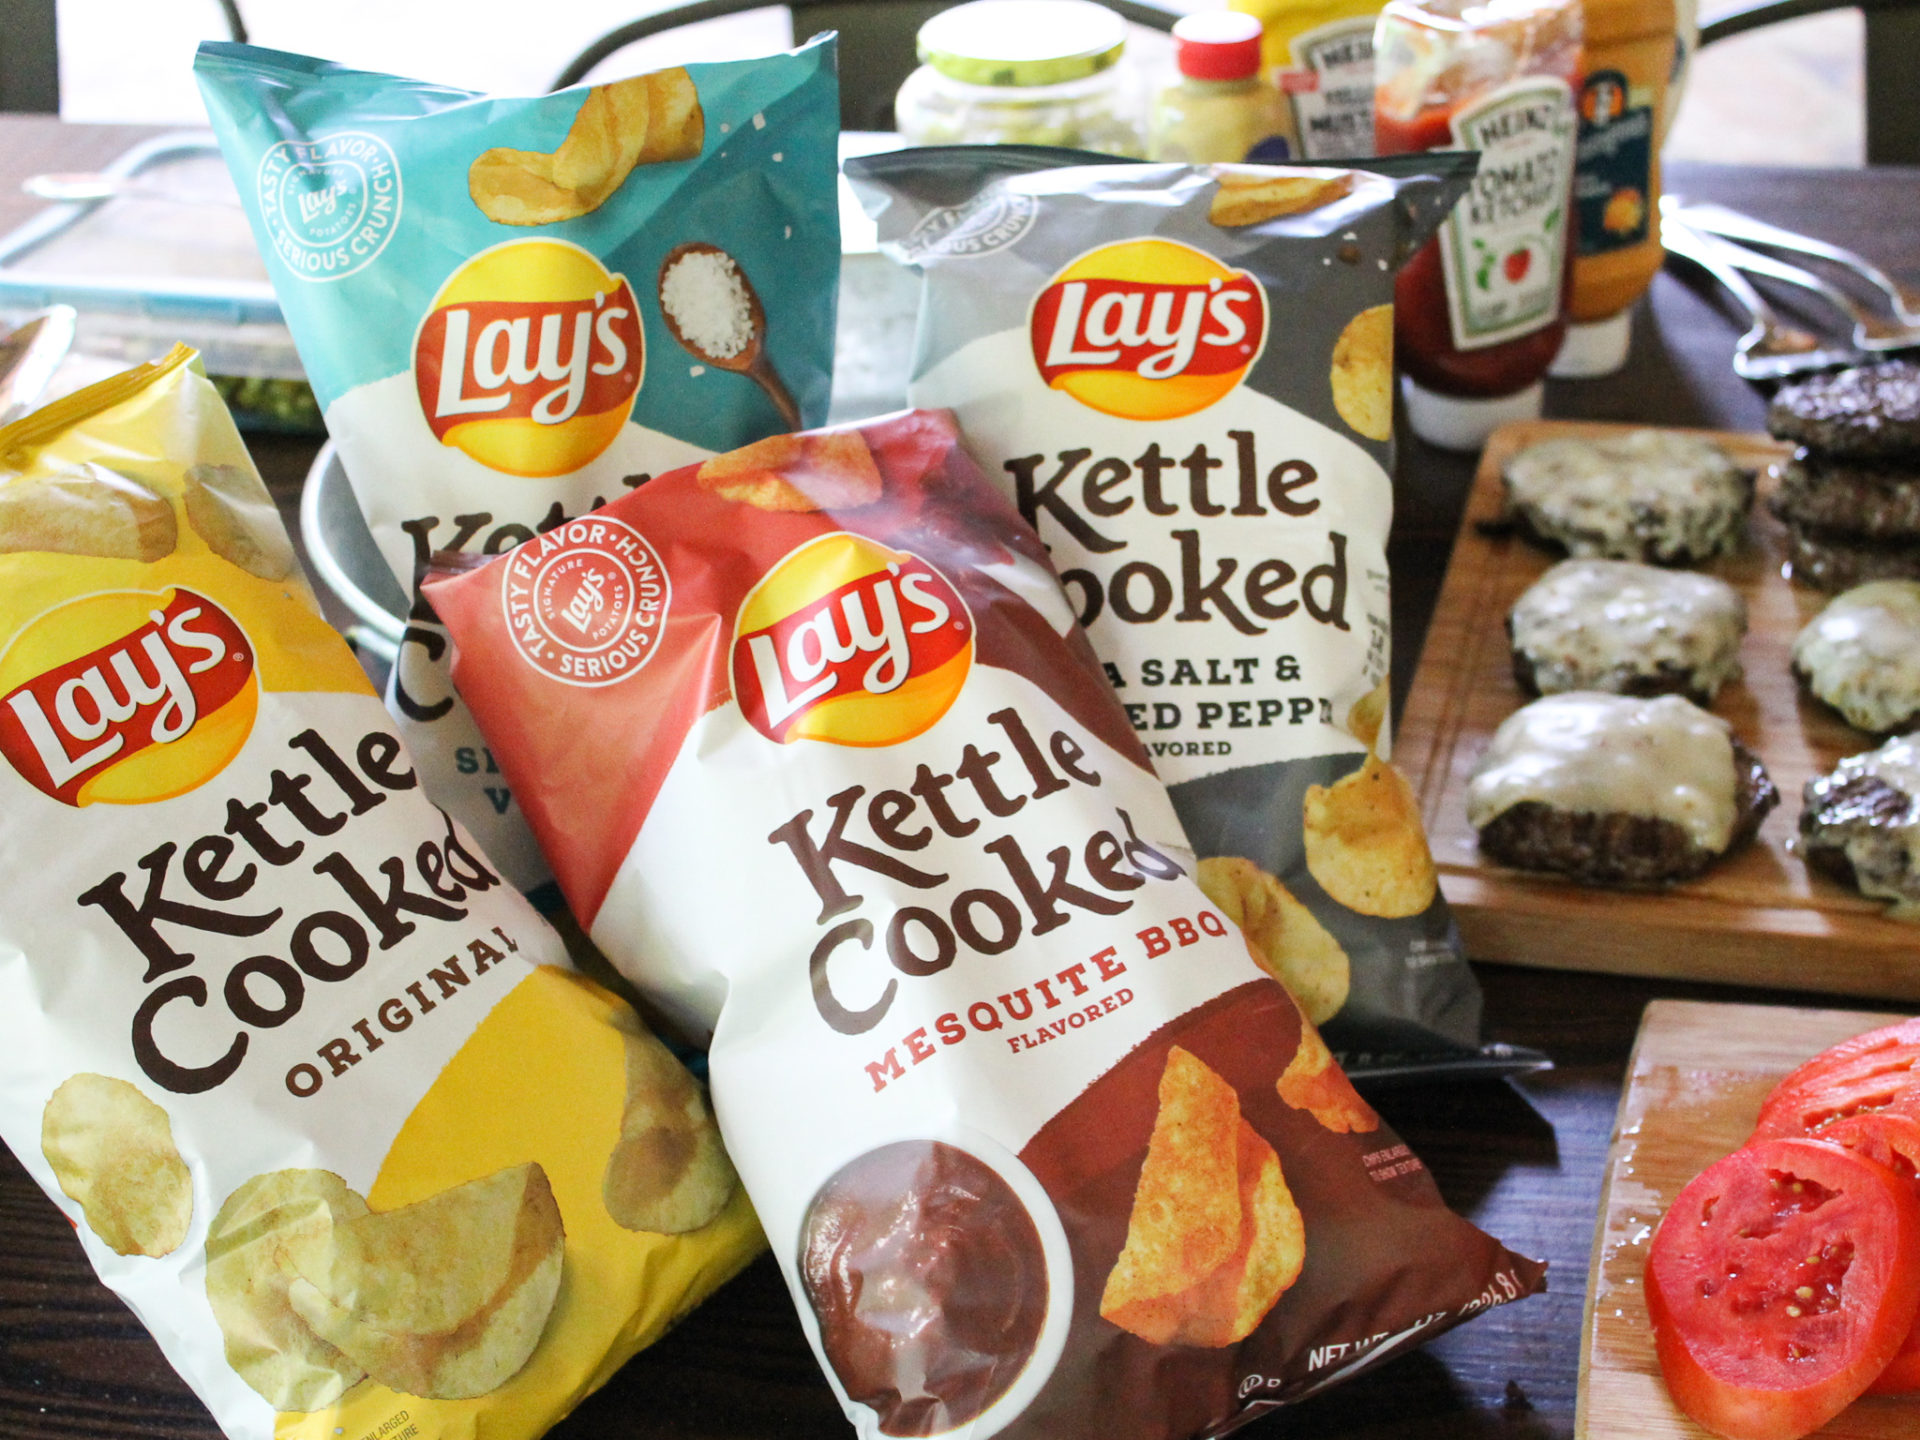 Lay’s Chips As Low As $1.49 At Kroger